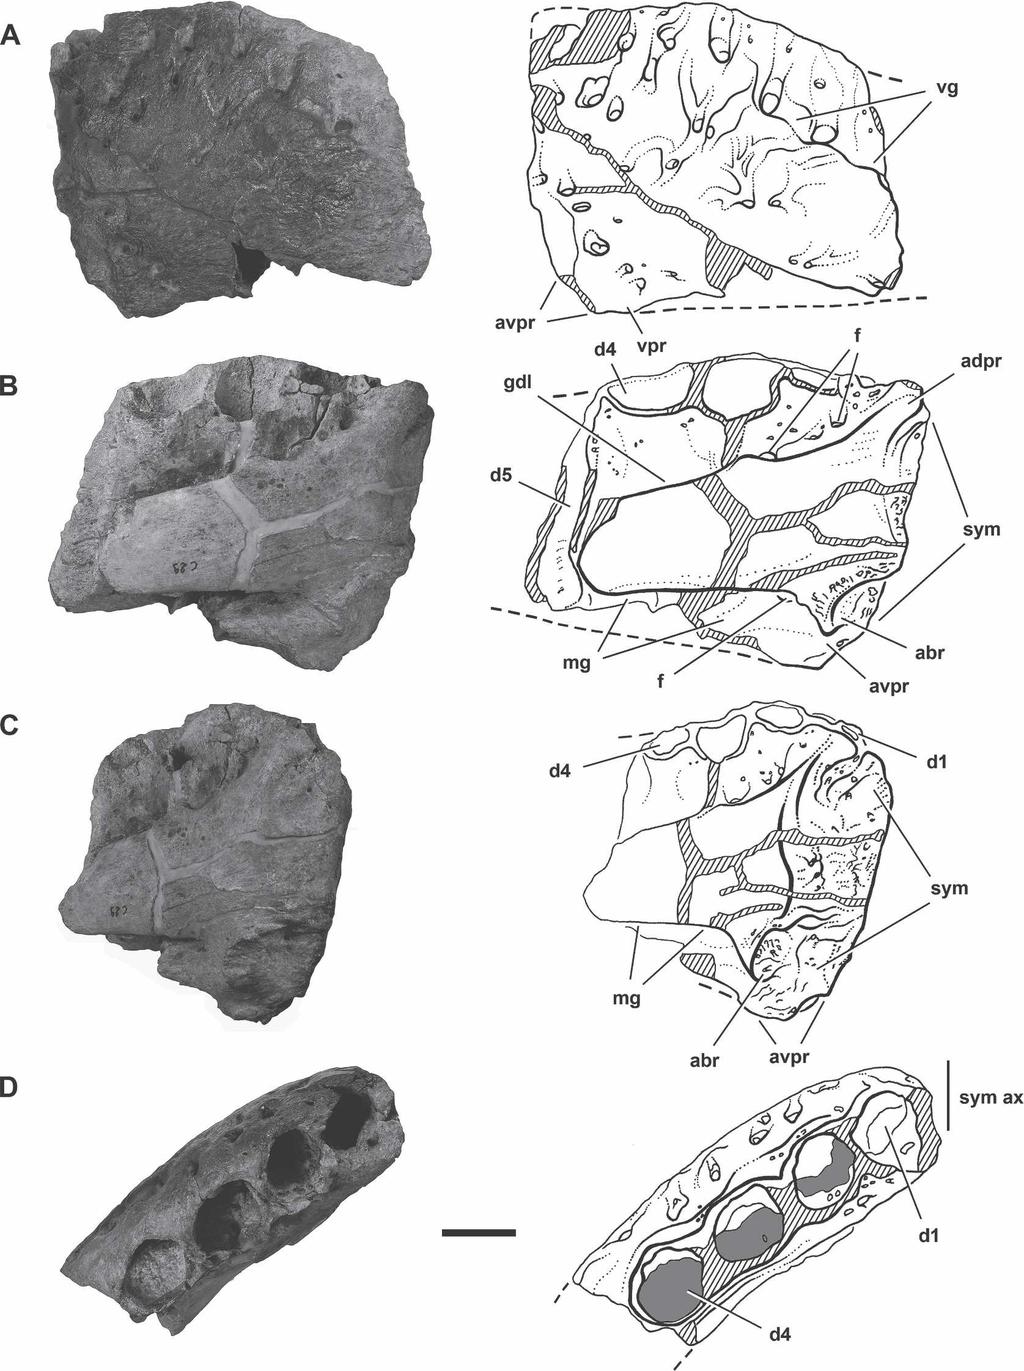 BRUSATTE AND SERENO NEW CARCHARODONTOSAURUS SPECIES 911 FIGURE 6. Photographs and line drawings of the anterior end of the left dentary of Carcharodontosaurus iguidensis n. sp. (MNN IGU5).